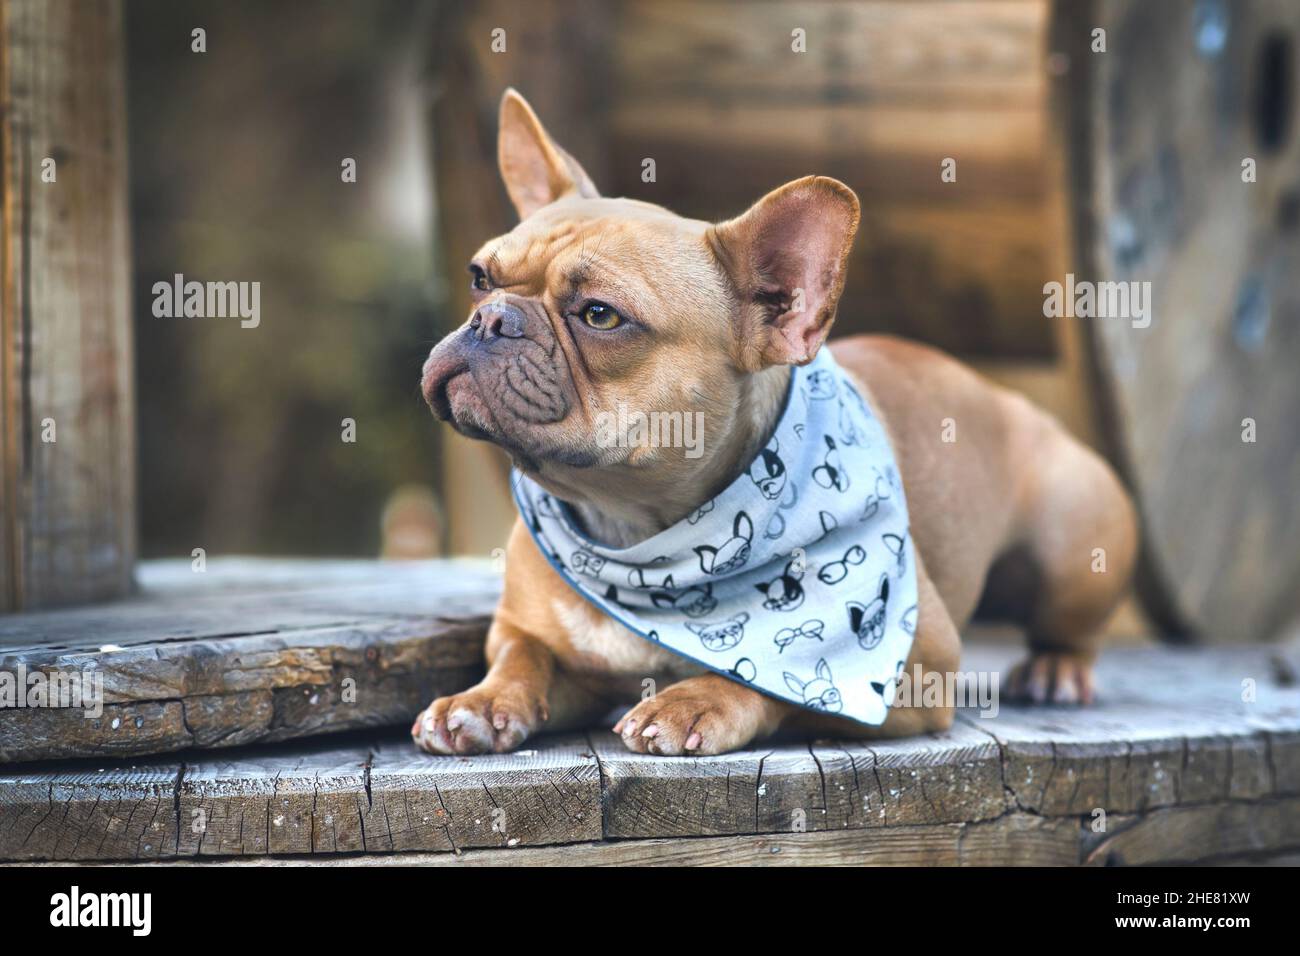 French Bulldog dog with blue neckerchief lying down between wooden industrial cable drums Stock Photo